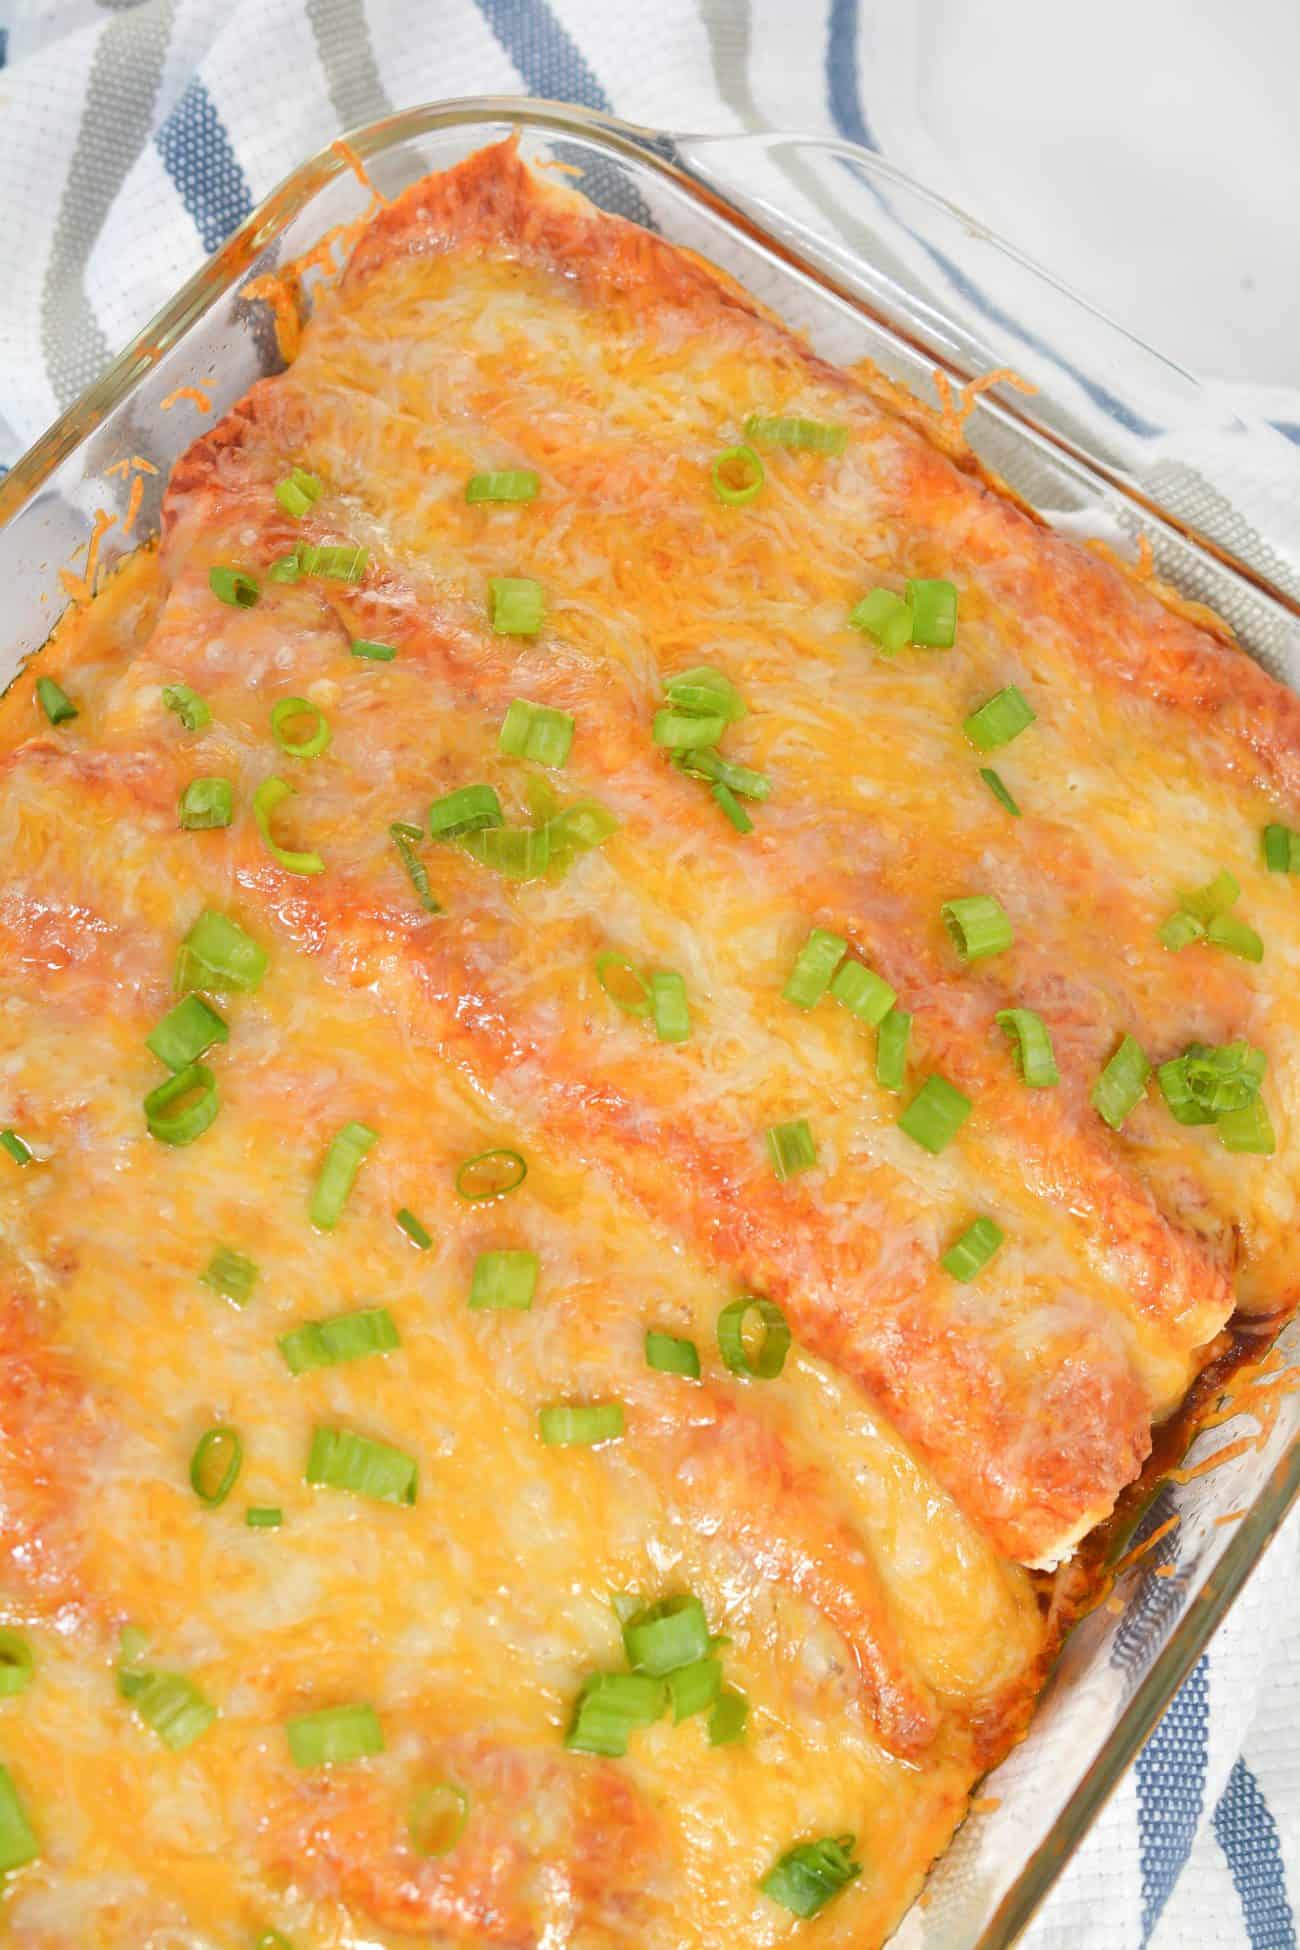 Baked Beef and Bean Enchiladas